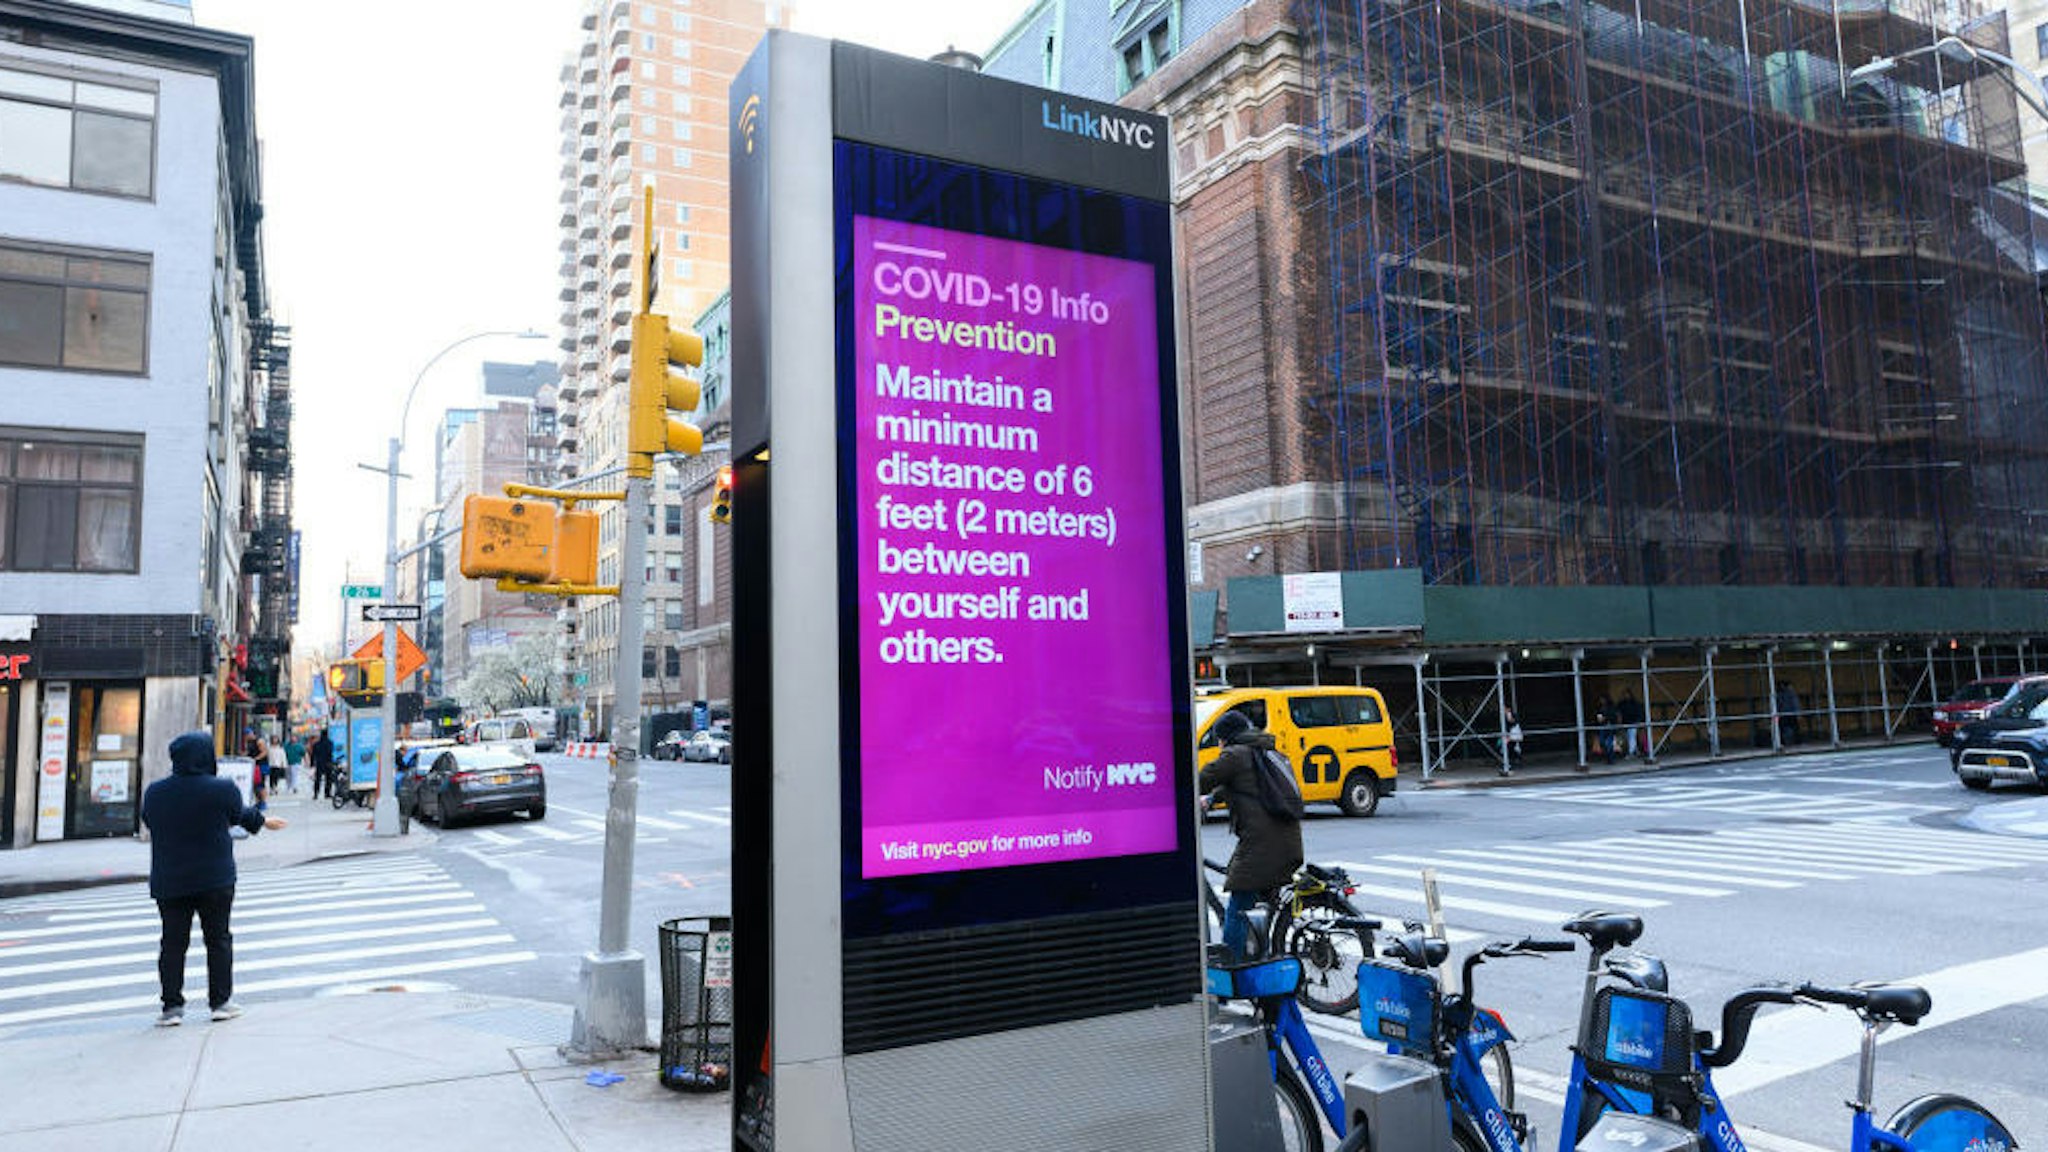 A LinkNYC screen in Gramercy is seen with information related to COVID-19 as the coronavirus continues to spread across the United States on March 20, 2020 in New York City. The World Health Organization declared coronavirus (COVID-19) a global pandemic on March 11th. (Photo by Noam Galai/Getty Images)